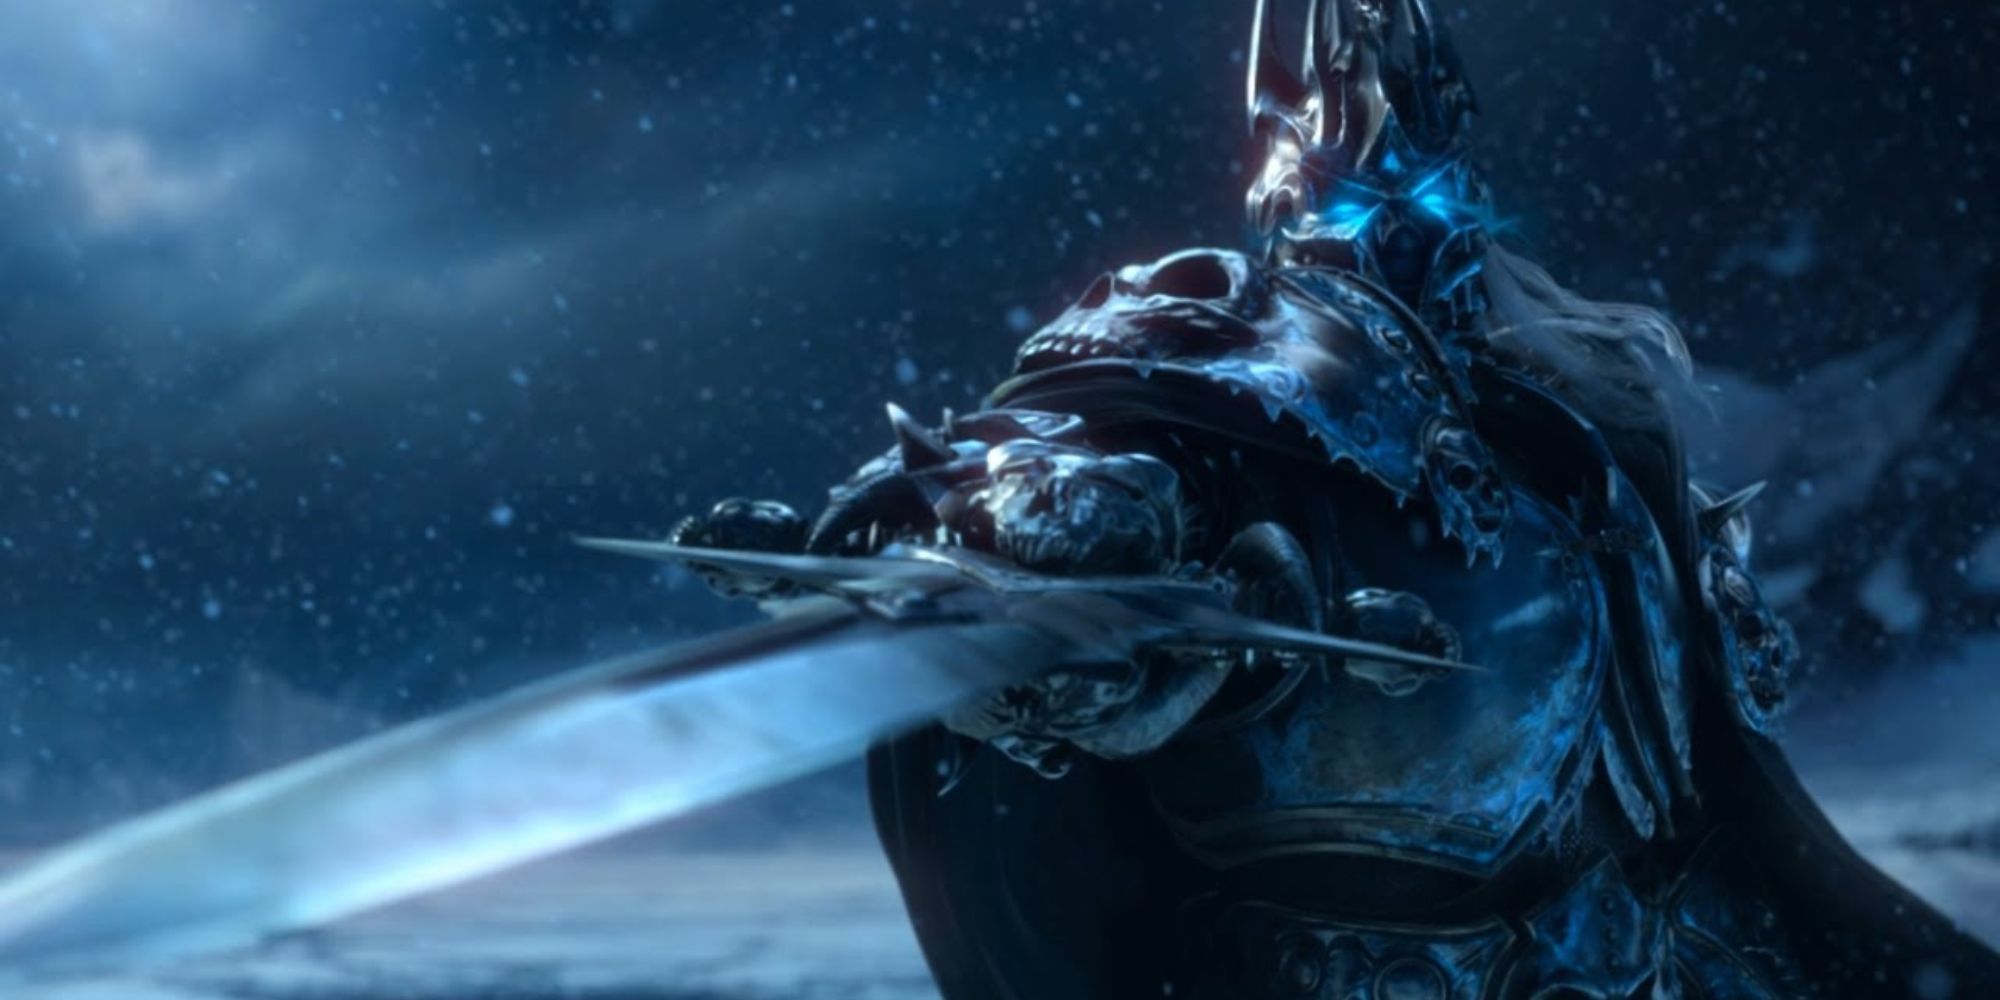 World of Warcraft cinematic - Arthas, the Lich King, points his sword at the camera